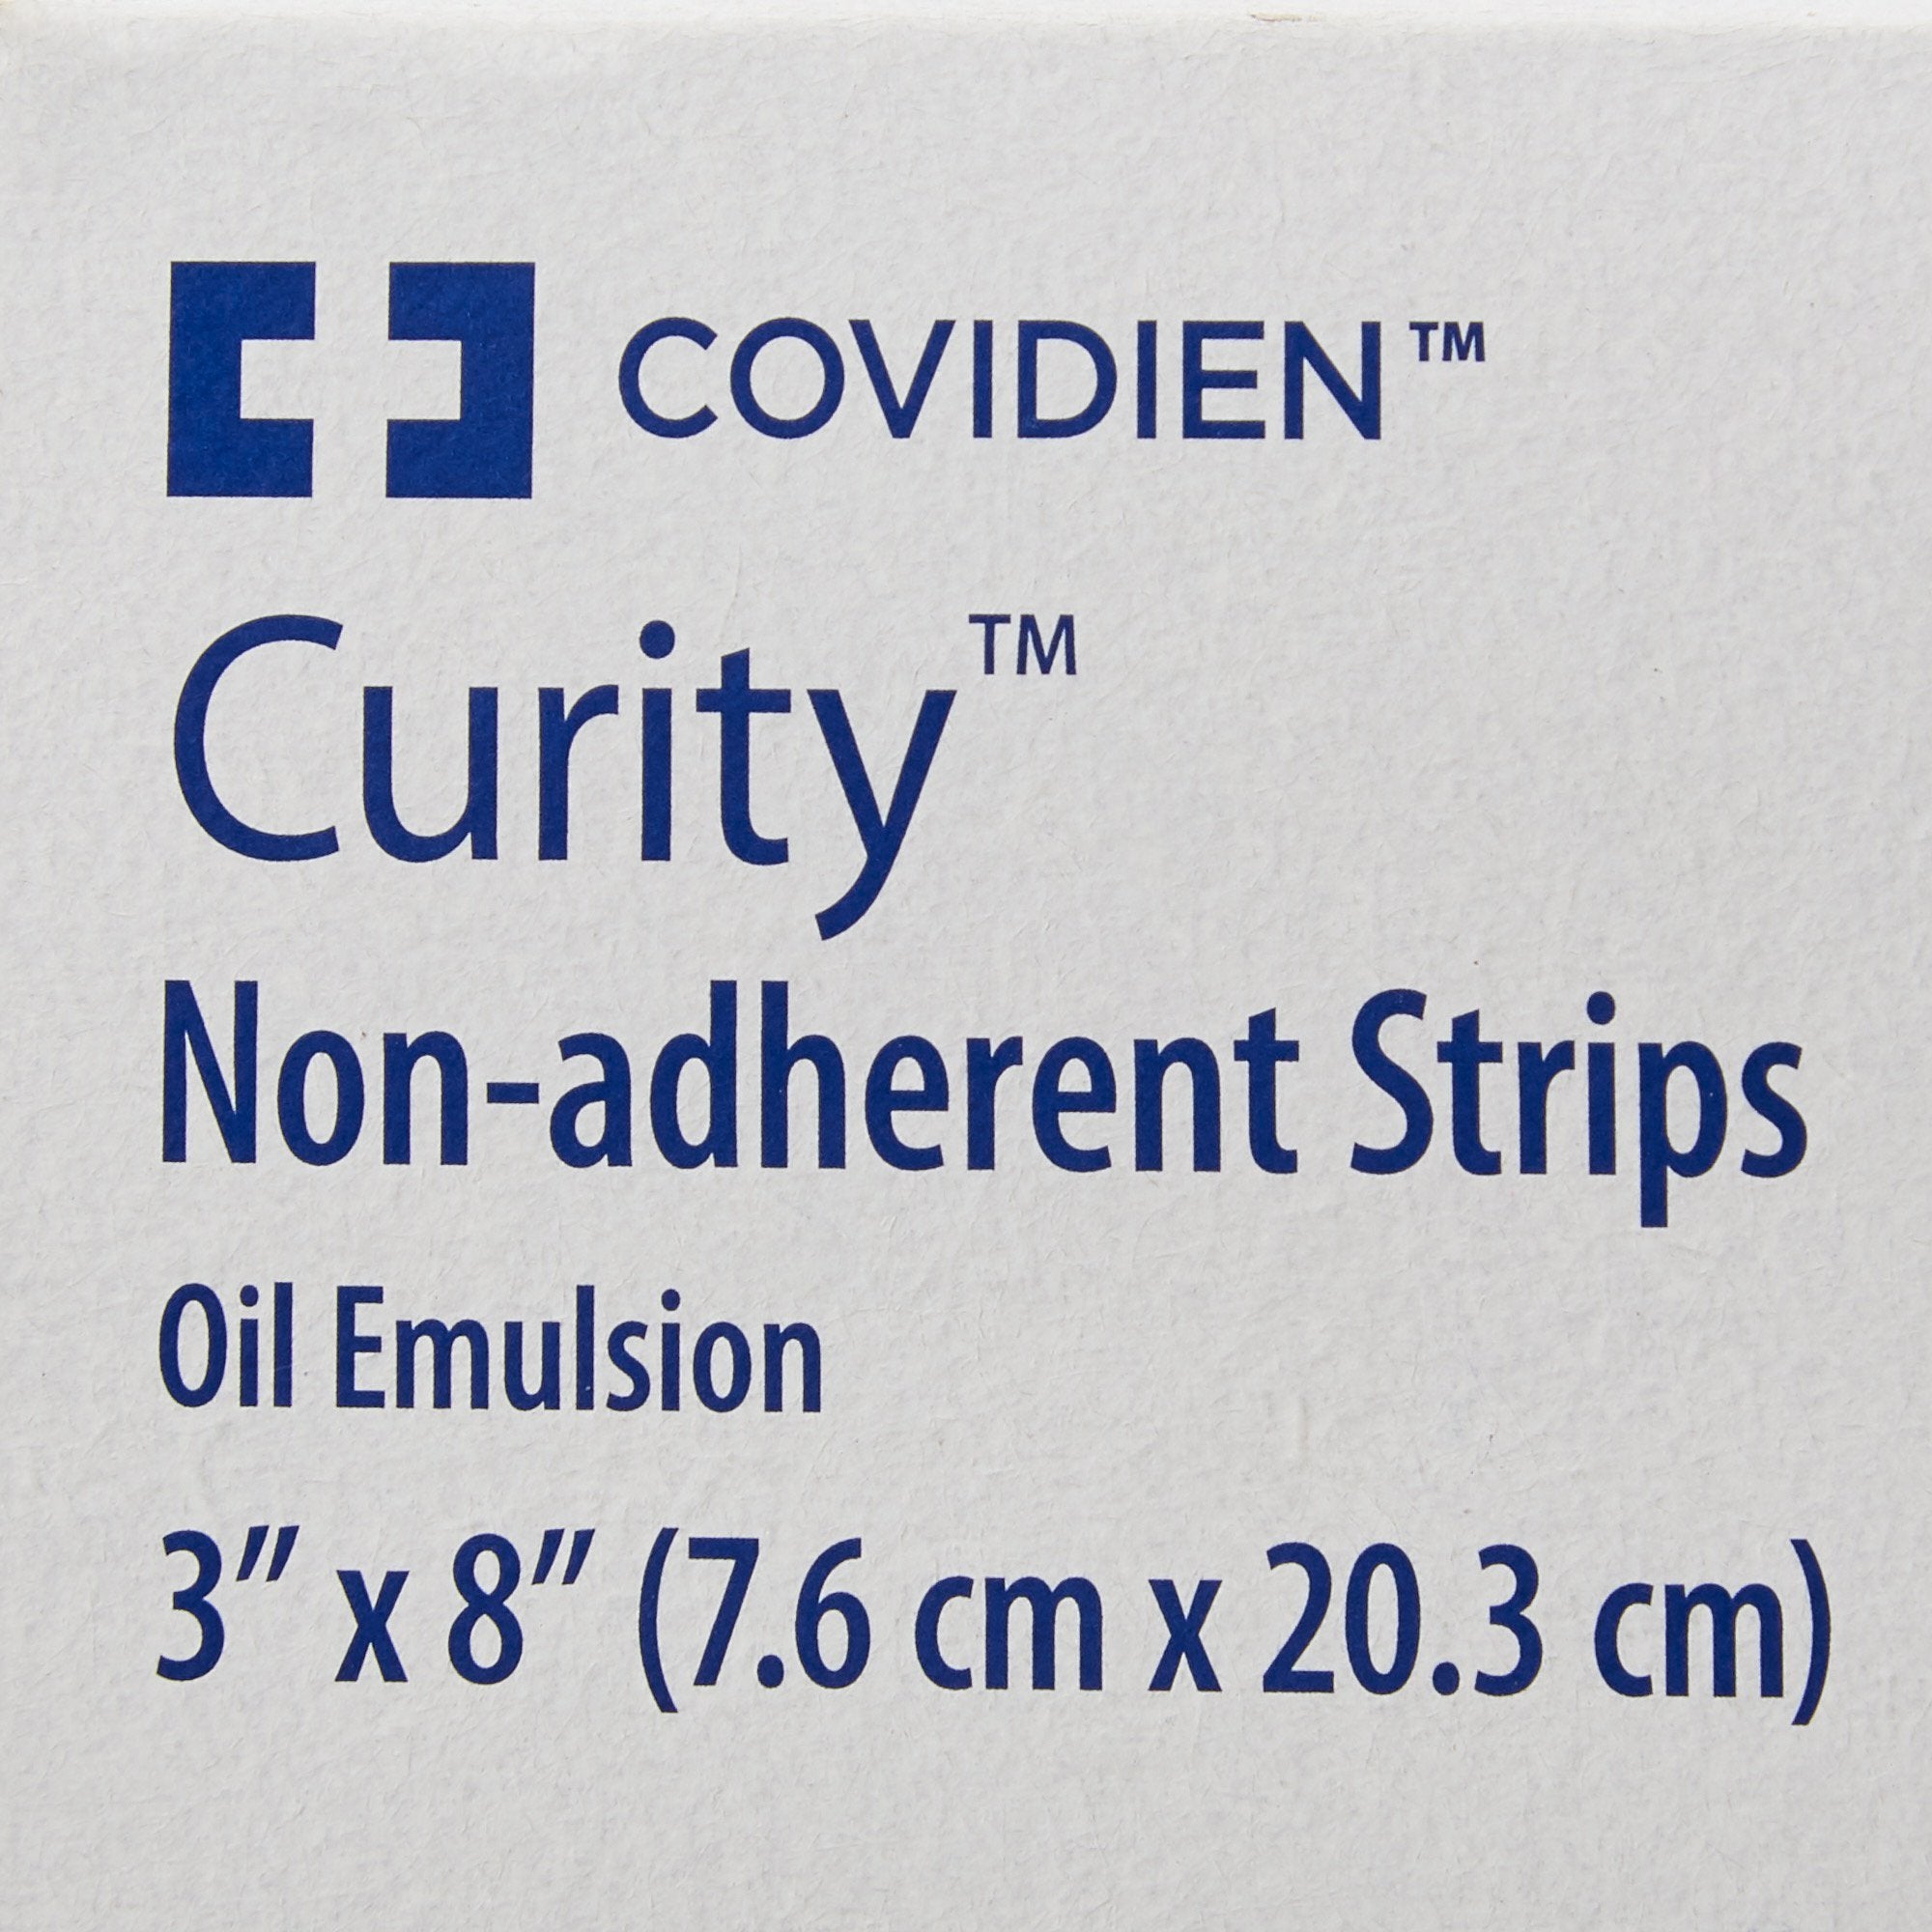 Oil Emulsion Impregnated Dressing Curity Rectangle 3 X 8 Inch Sterile